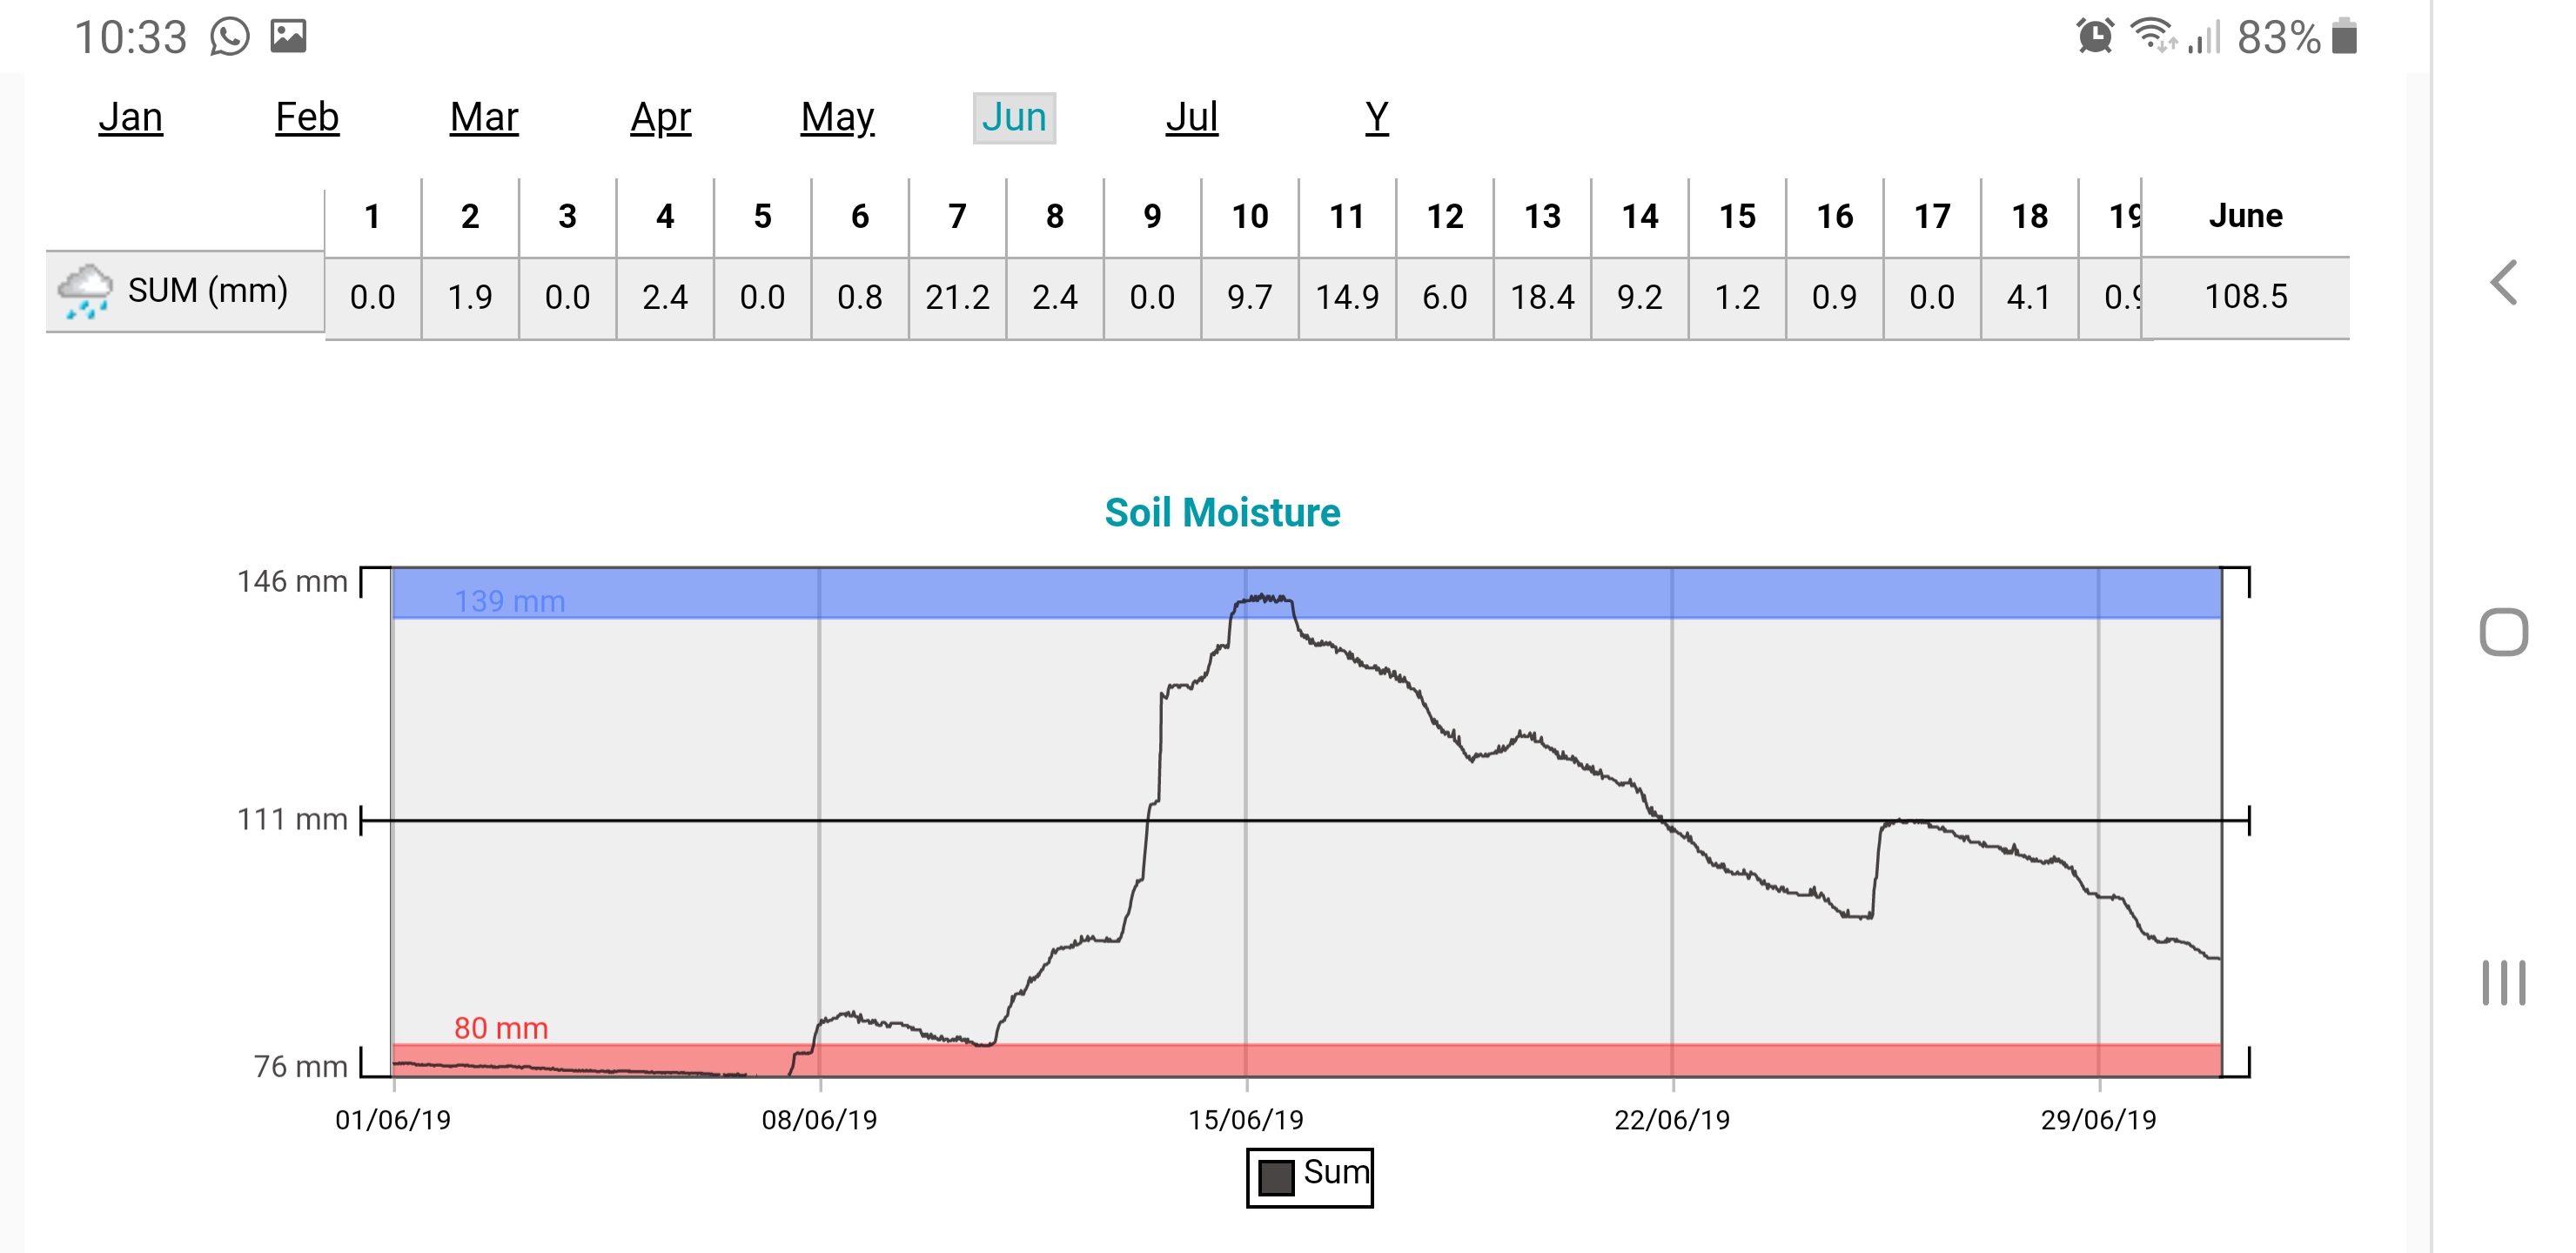 soil moisture graph showing the changes in soil moisture throughout the year